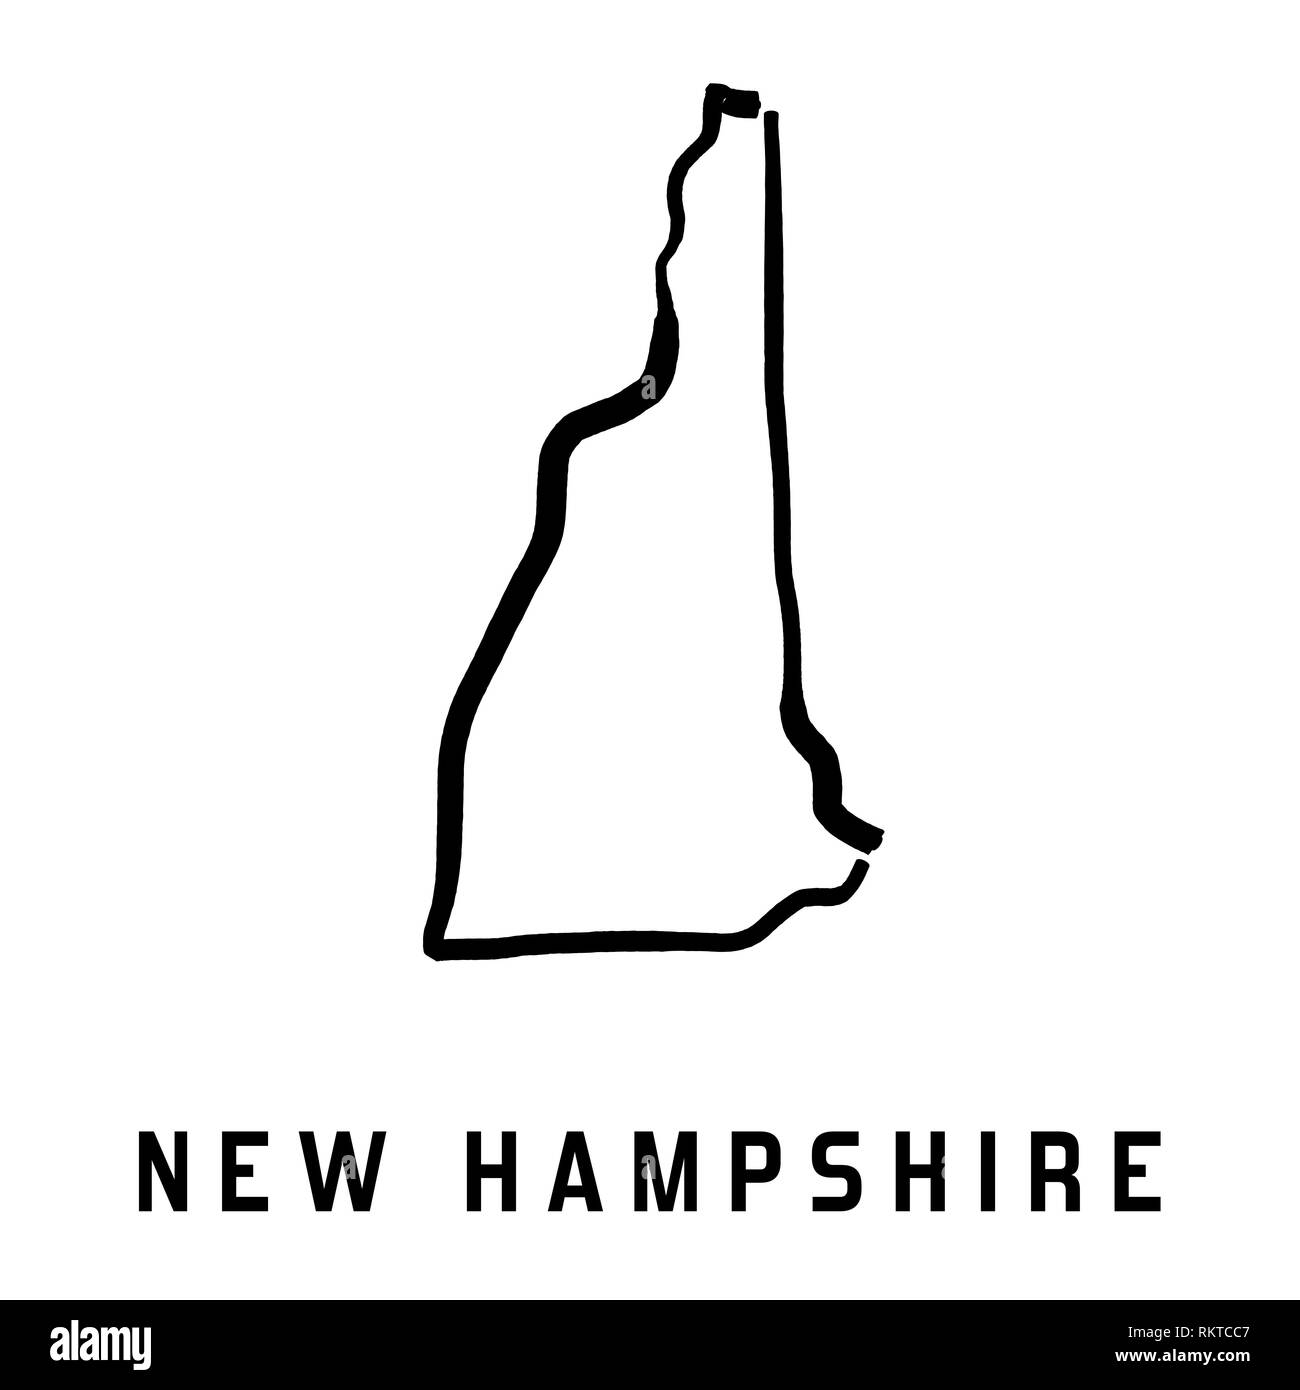 New Hampshire simple logo. State map outline - smooth simplified US state shape map vector. Stock Vector